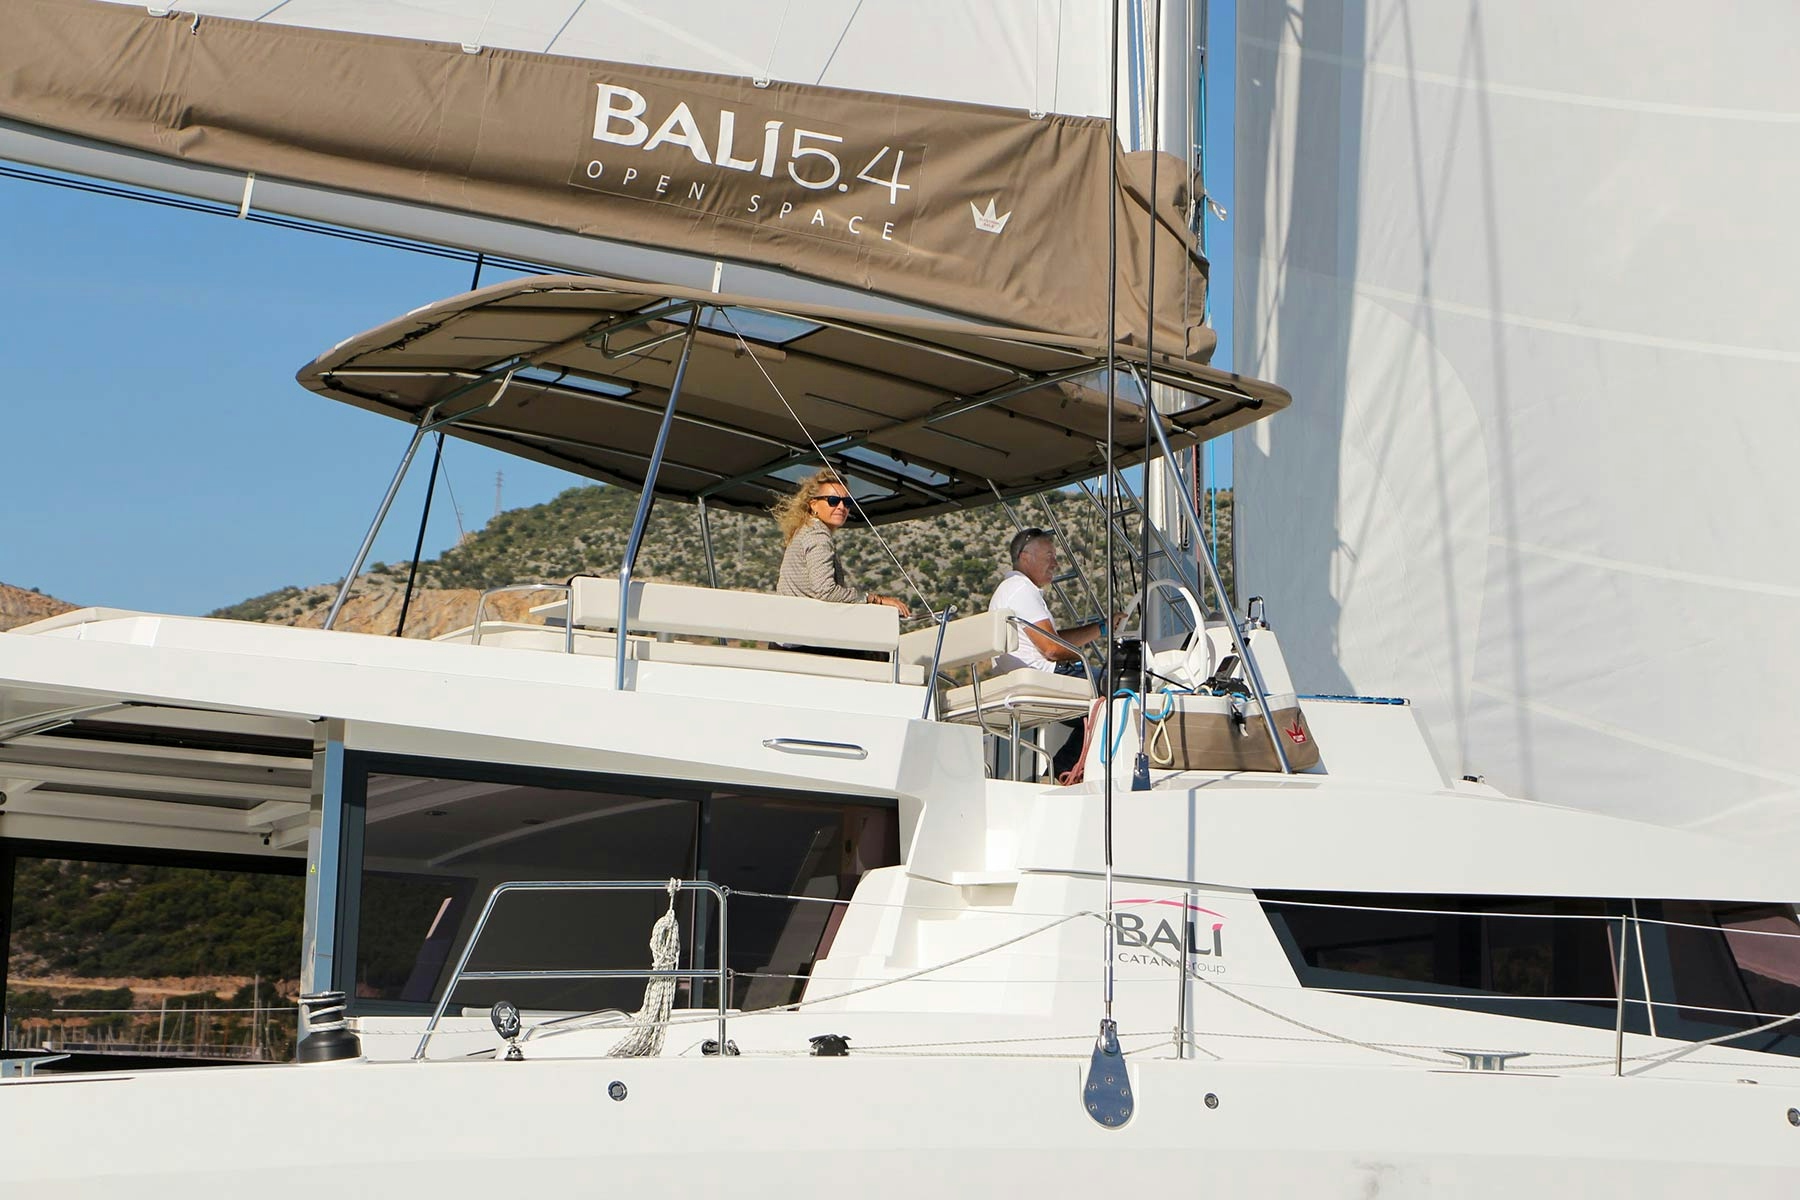 Bali 5.4 - Total covering - Yacht Wrapping